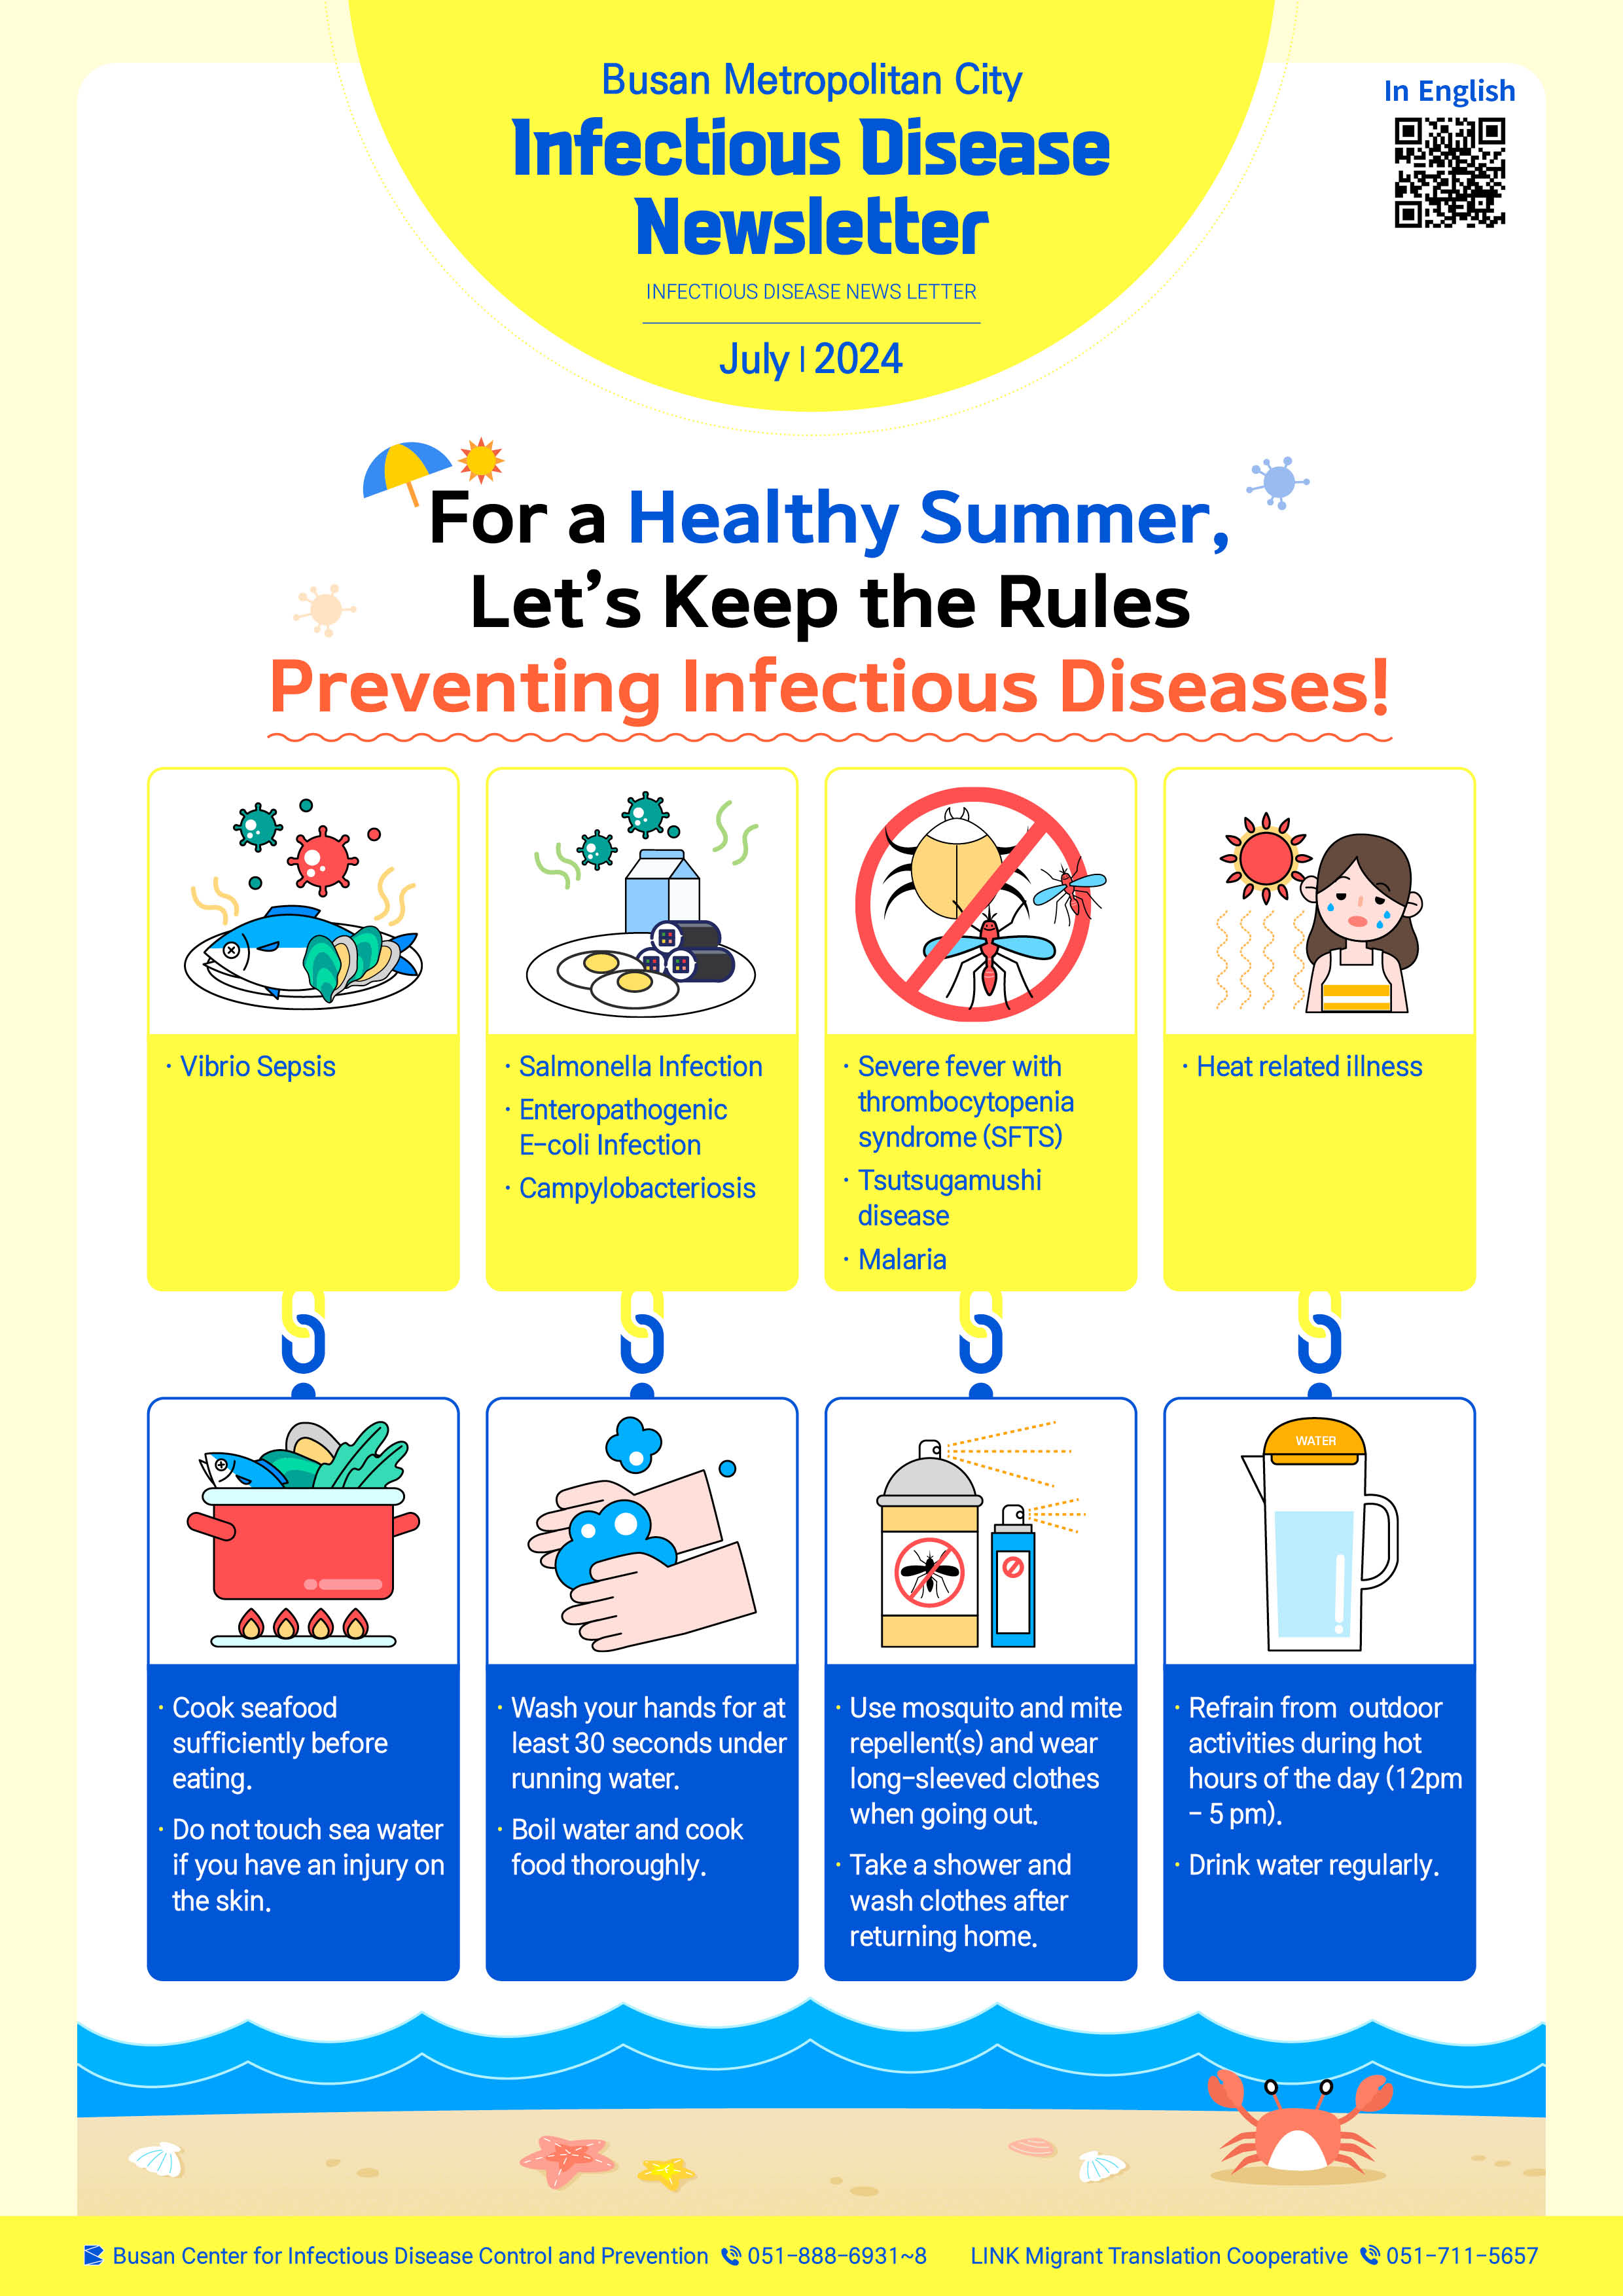 Busan Metropolitan City Infectious Disease Newsletter
July 2024
For a Healthy Summer,
Let’s Keep the Rules Preventing Infectious Diseases!
Vibrio Sepsis
Cook seafood sufficiently before eating.
Do not touch sea water if you have an injury on the skin.
Salmonella Infection
Enteropathogenic E-coli Infection
Campylobacteriosis
Wash your hands for at least 30 seconds under running water.
Boil water and cook  food thoroughly.
Severe fever with thrombocytopenia syndrome (SFTS)
Tsutsugamushi disease
Malaria 
Use mosquito and mite repellent(s) and wear long-sleeved clothes when going out.
Take a shower and wash clothes after returning home.
Heat related illness 
Refrain from  outdoor activities during hot hours of the day (12pm - 5 pm).
Drink water regularly.
Busan Center for Infectious Disease Control and Prevention 051-888-6931~8 
Infectious Disease Management Department, Busan Metropolitan City 051-888-3321~7
 사진0